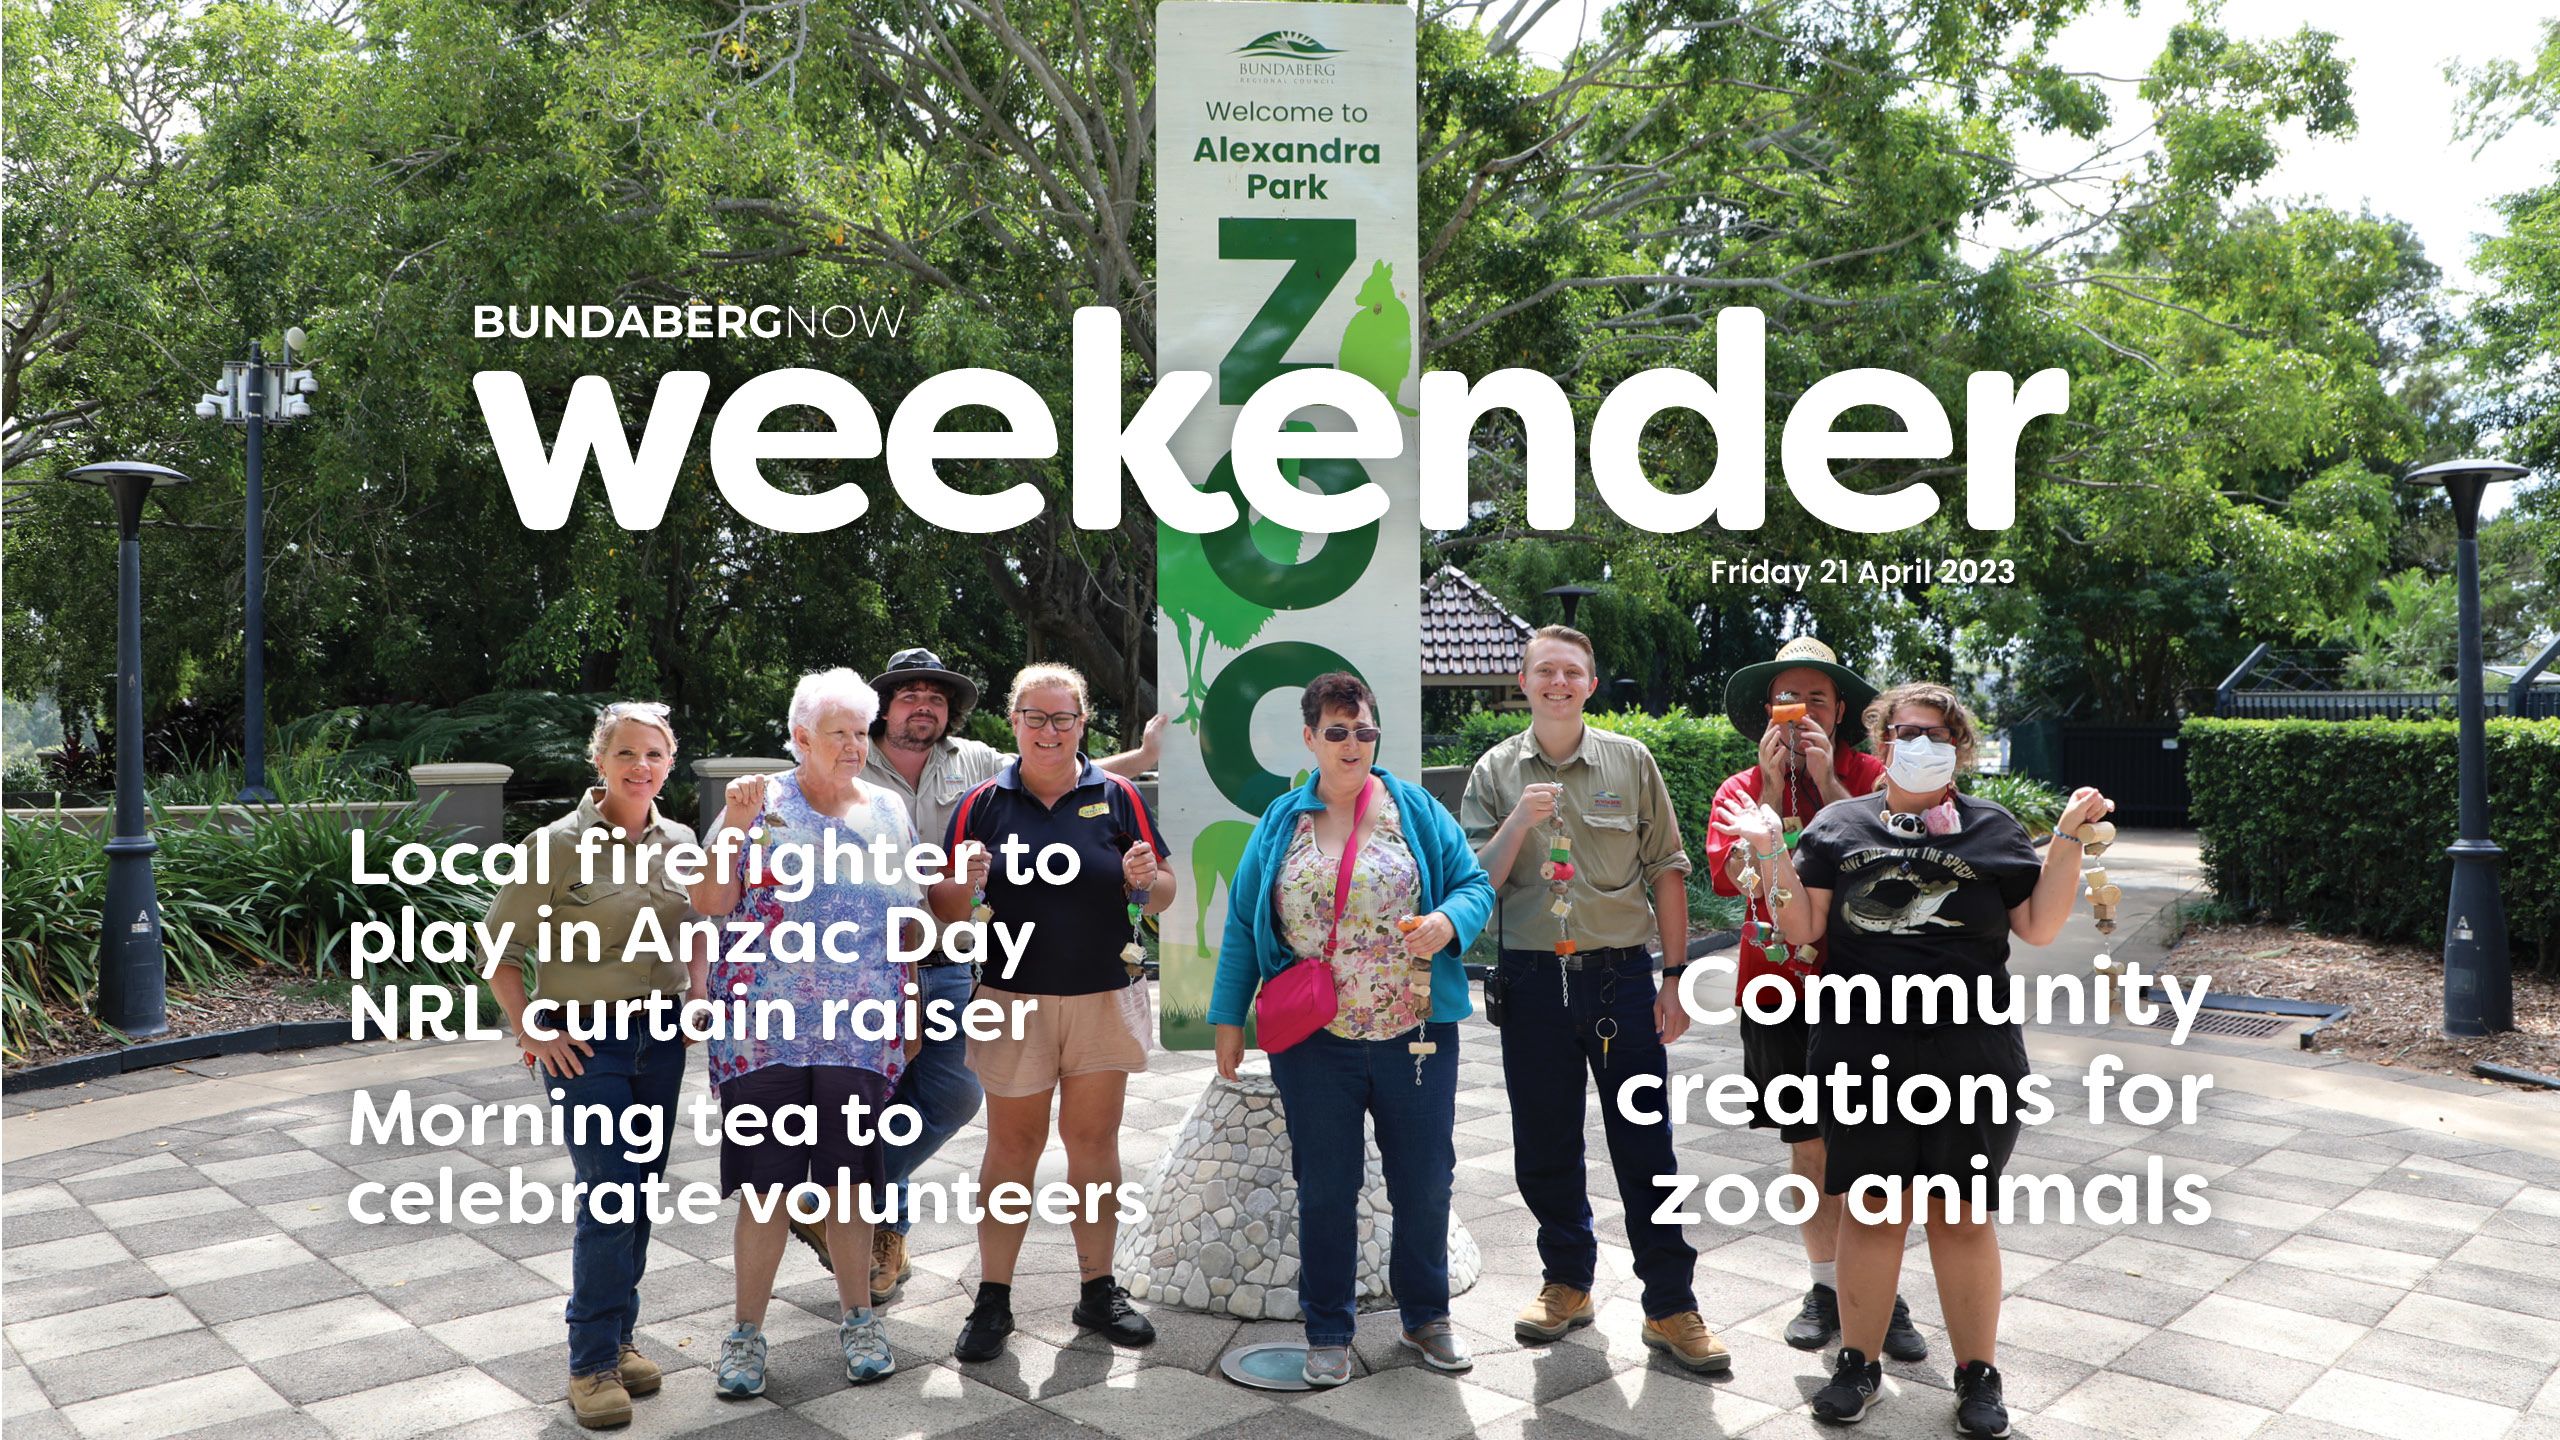 Weekender: community creations for zoo animals